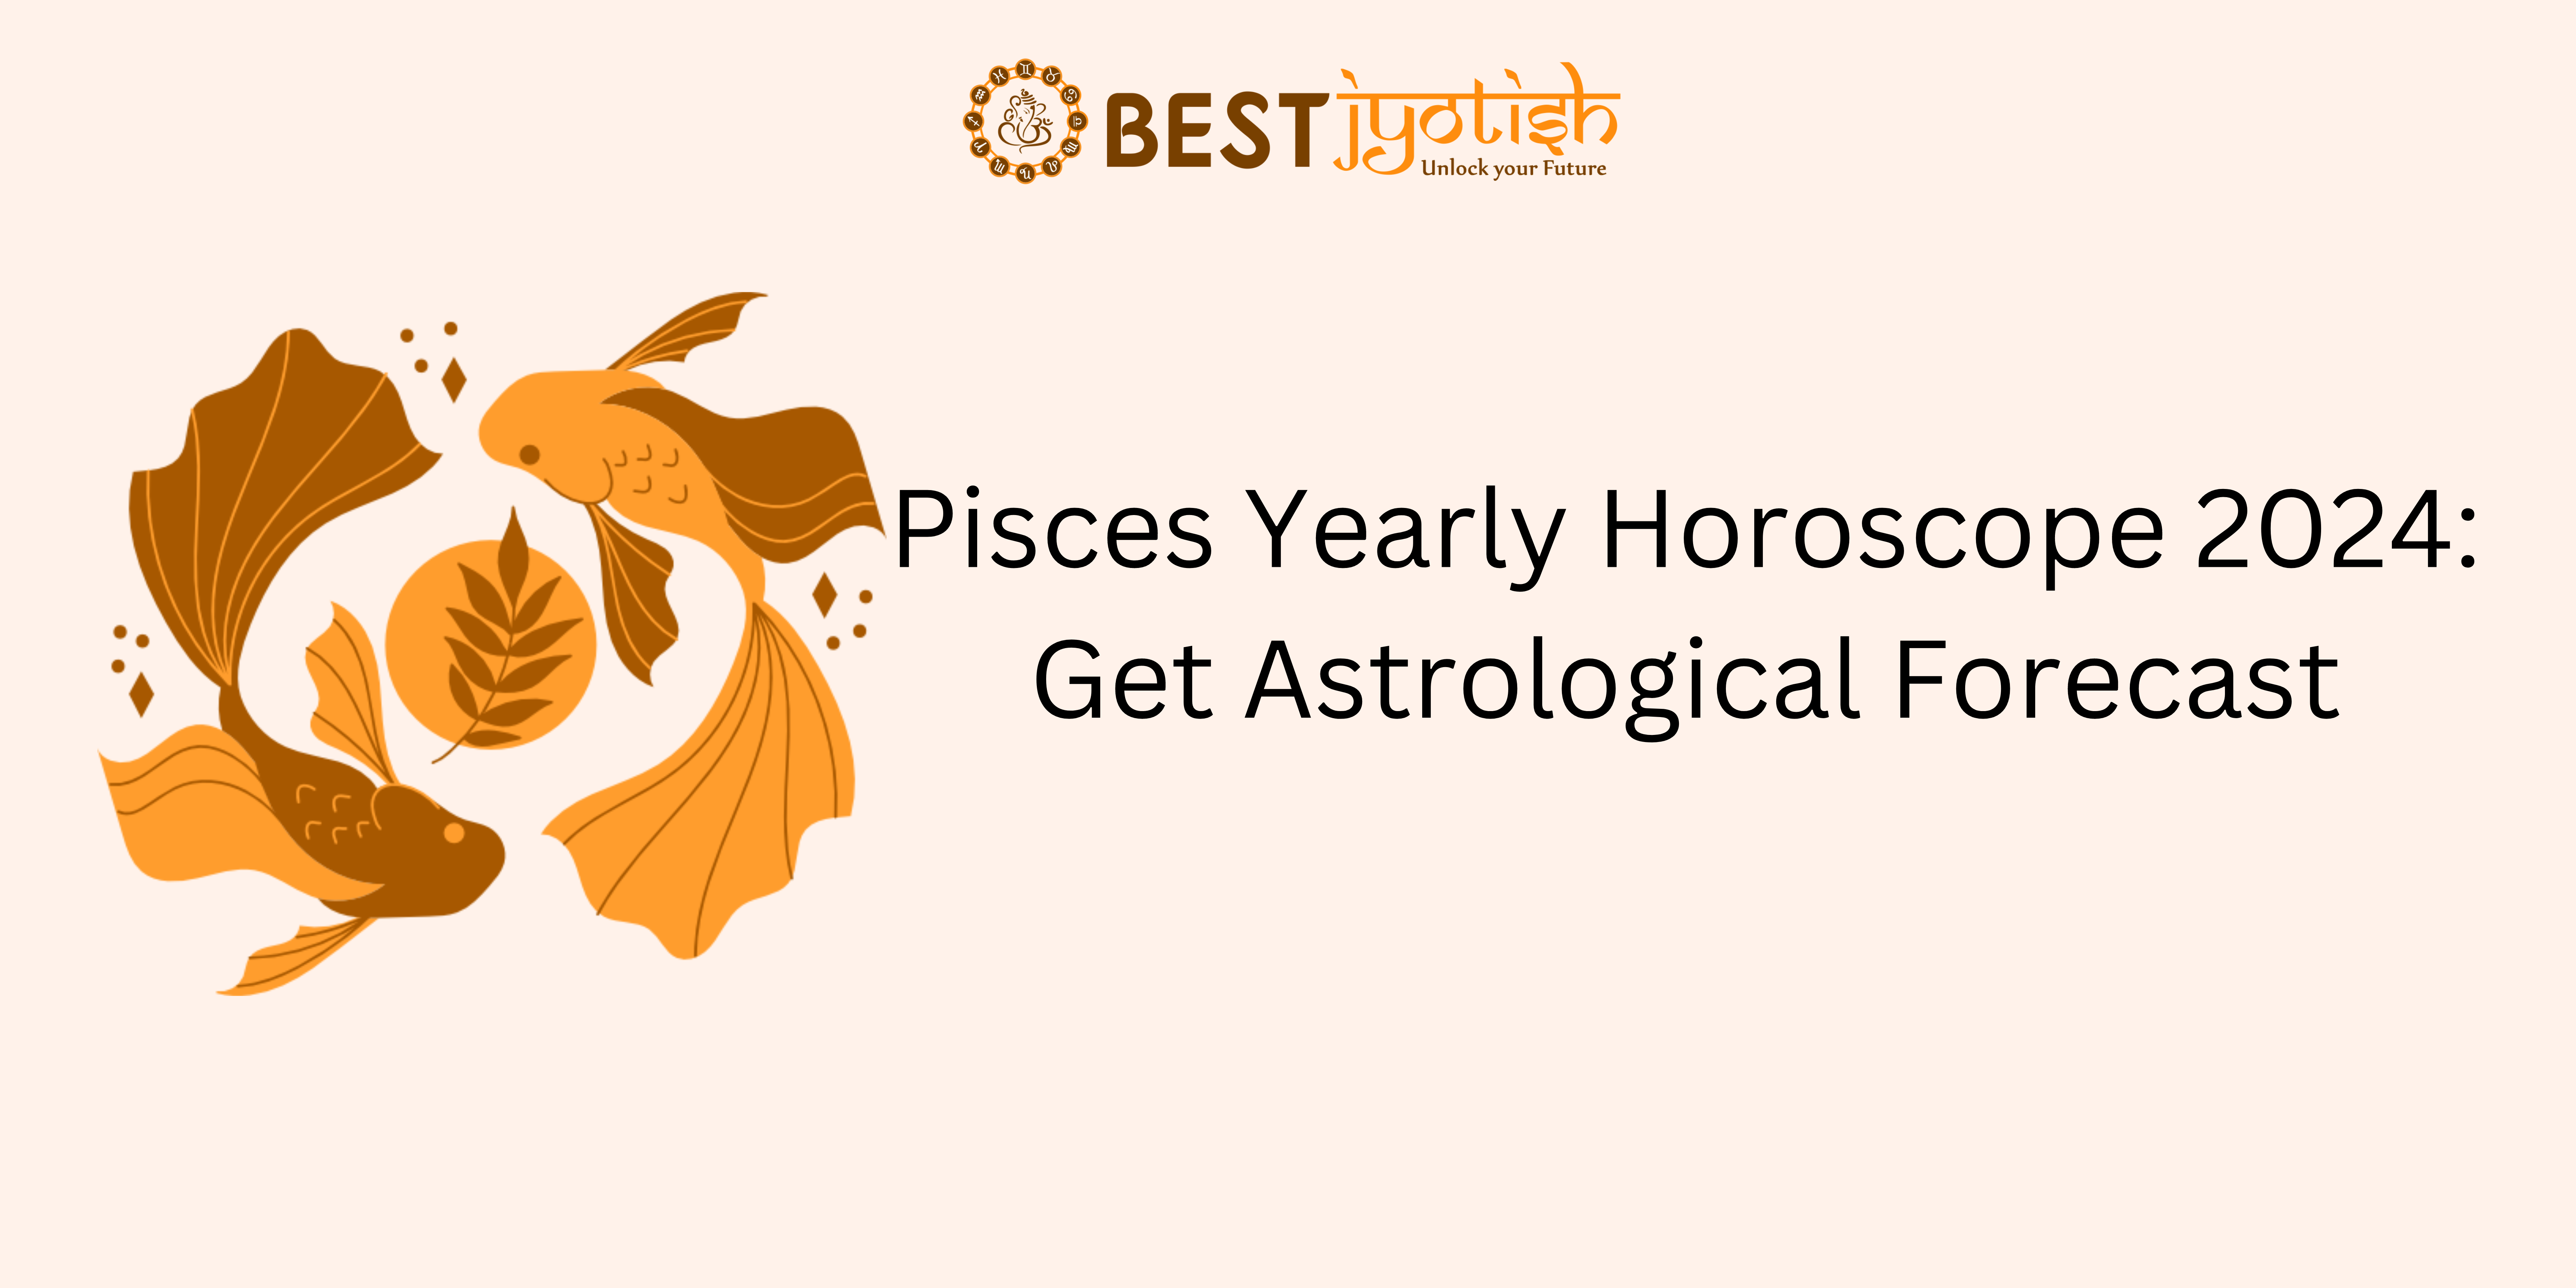 Pisces Yearly Horoscope 2024: Get Astrological Forecast